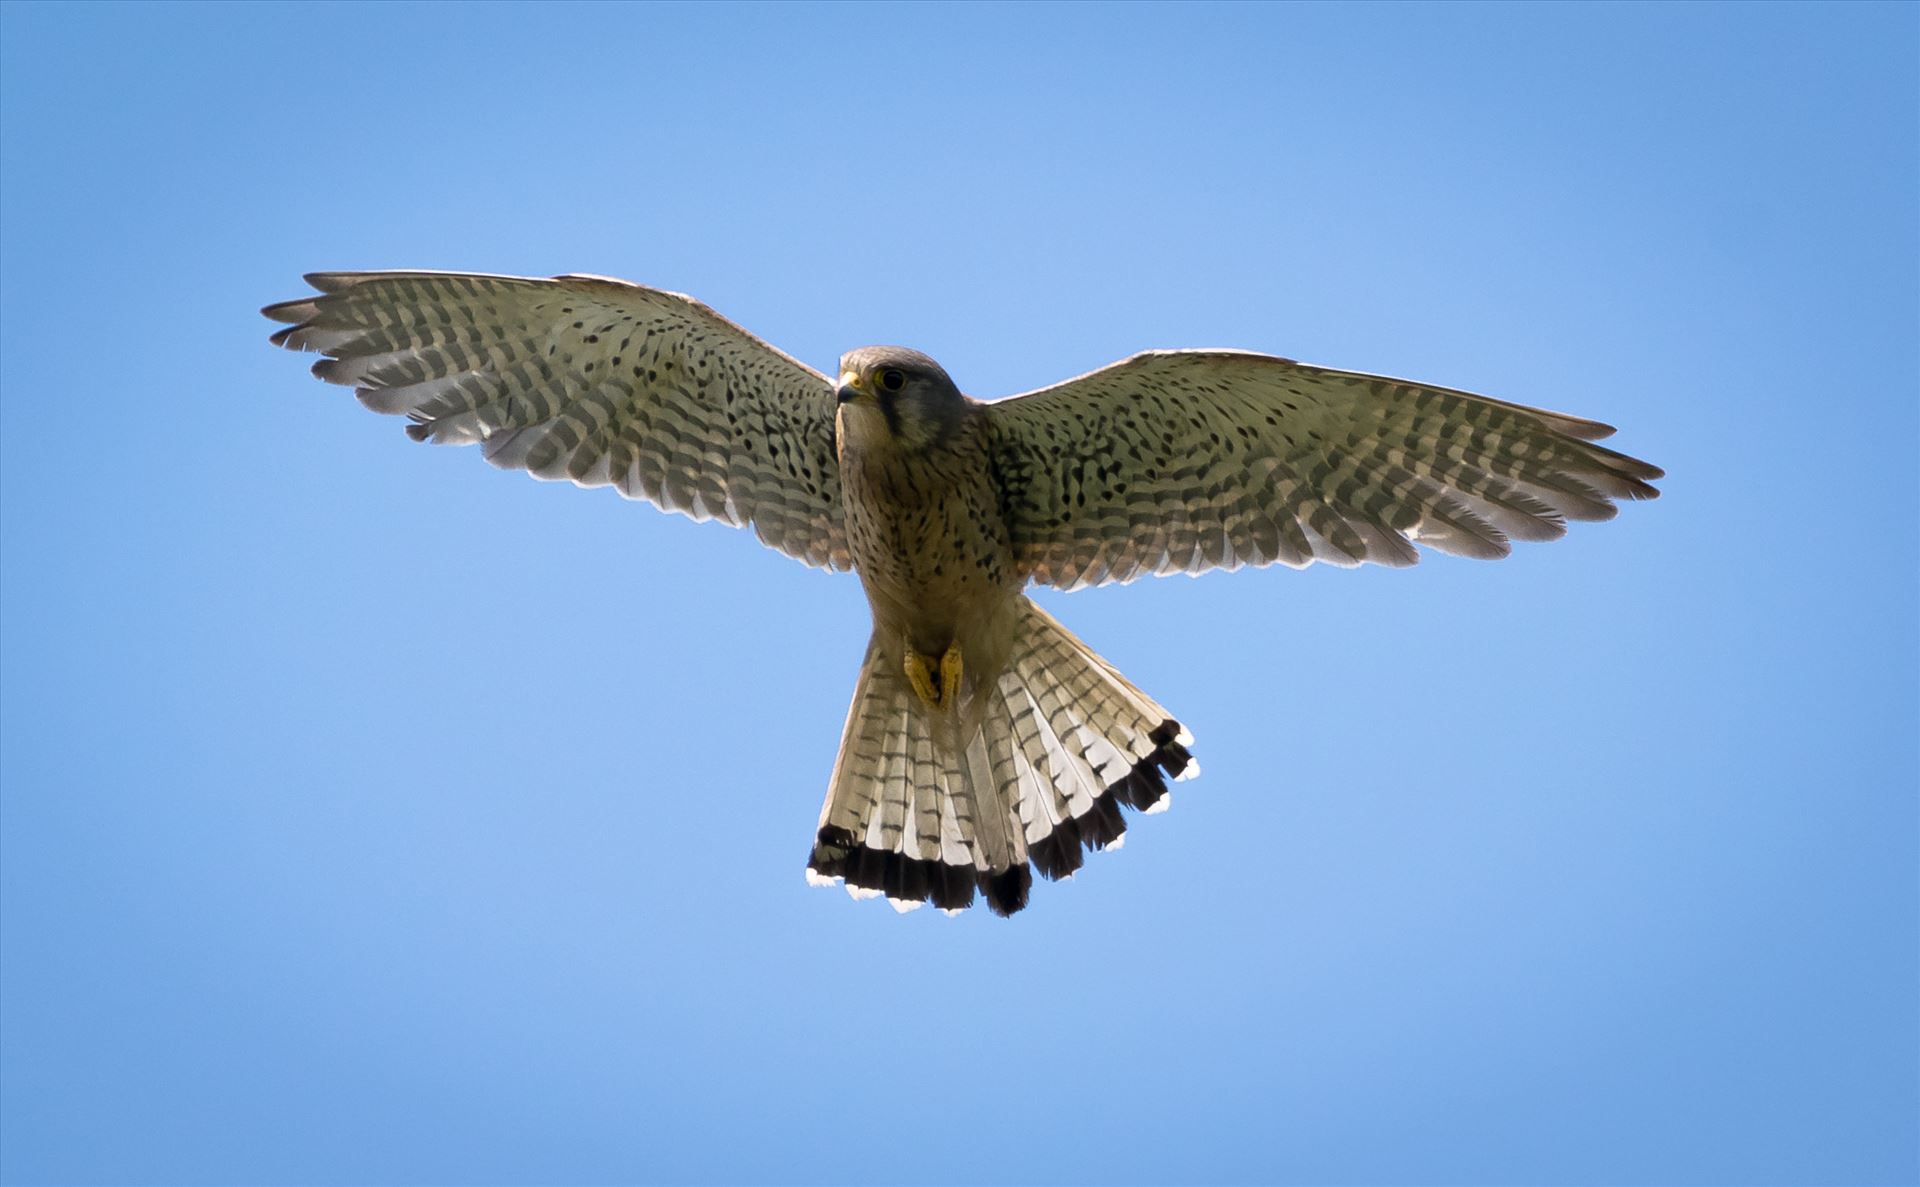 Kestrel hunting at RSPB Saltholme, - Came out of one of the hides at RSPB Salyholme and this beauty was hovering just above me. by AJ Stoves Photography